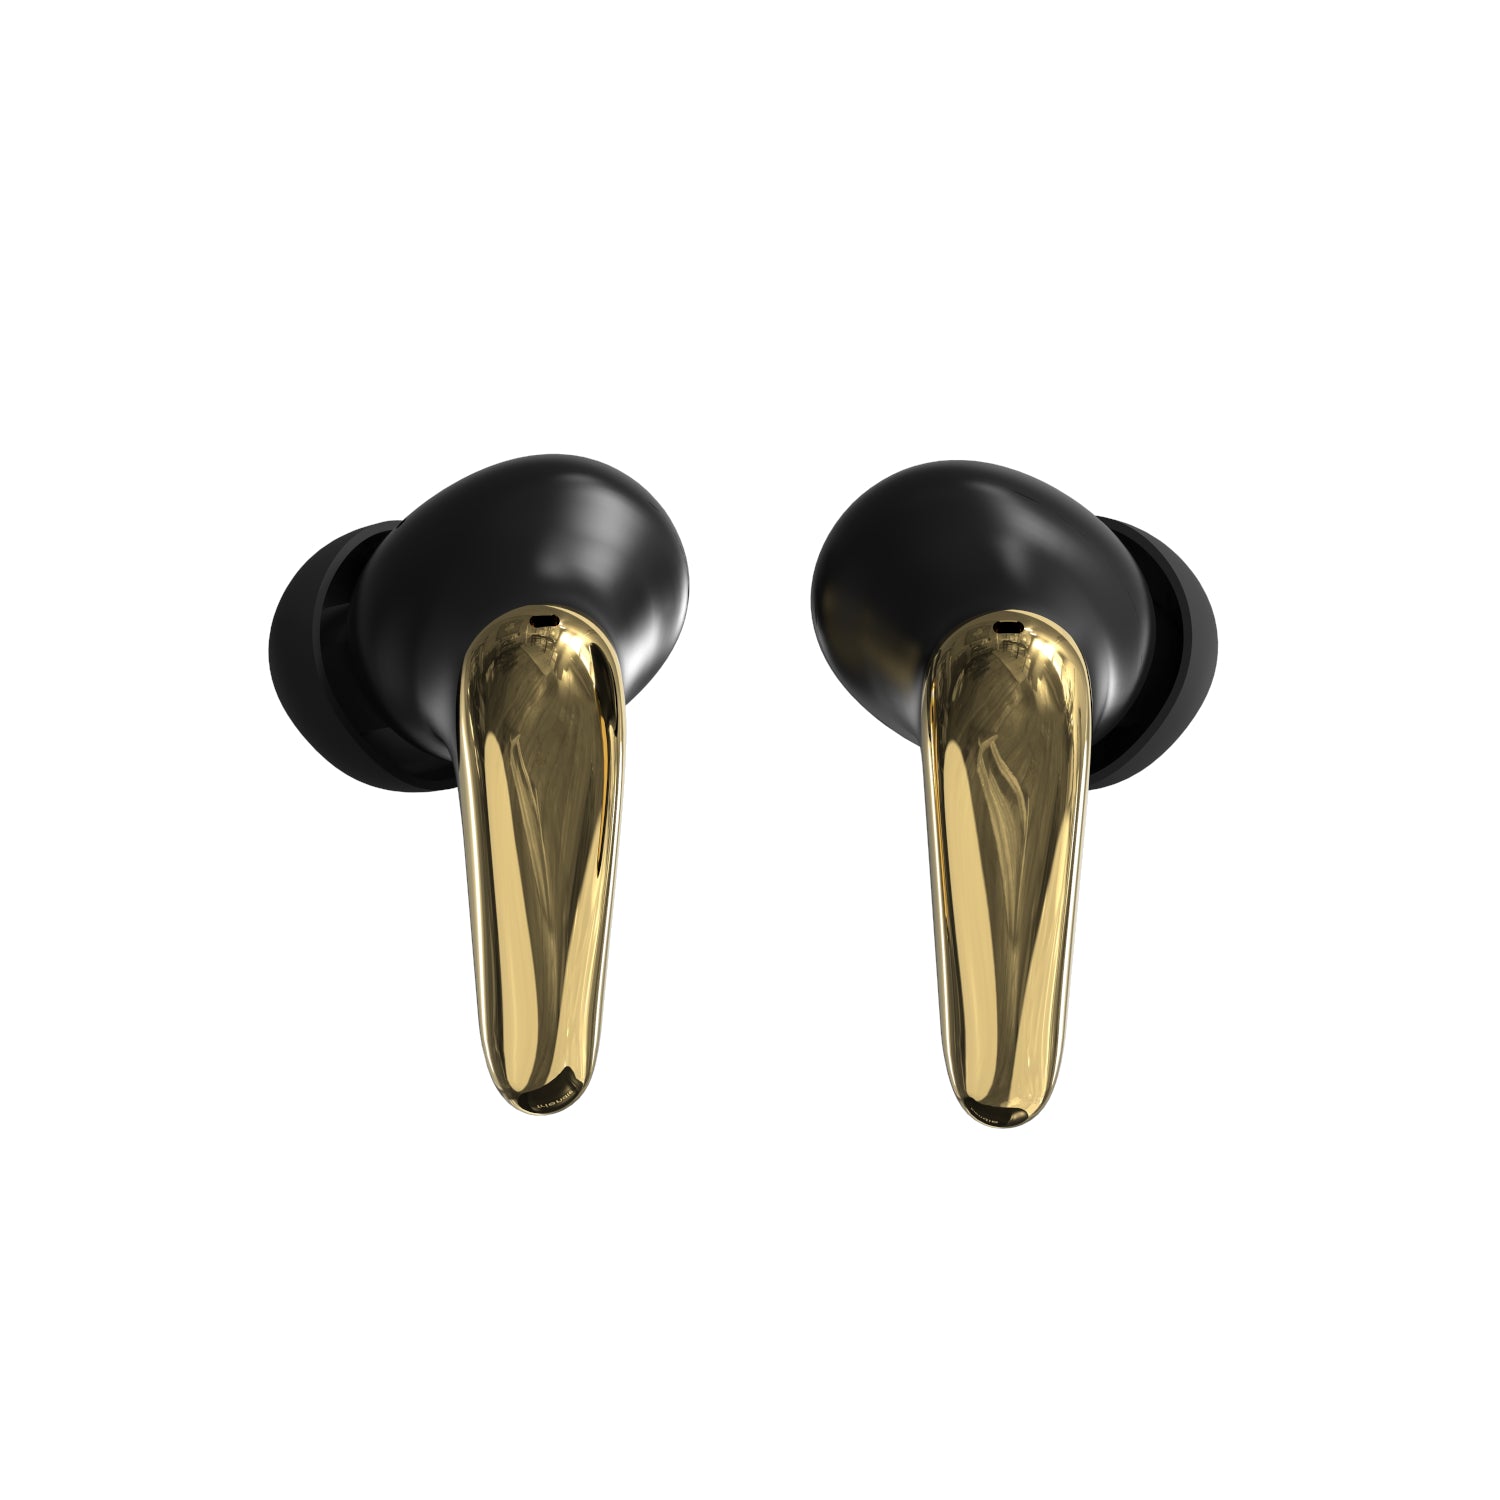 AIR Focus ANC Matte Black and Gold Active Noise Cancelling Earbuds (In Ear Wireless Headphones) - Friendie Pty Ltd